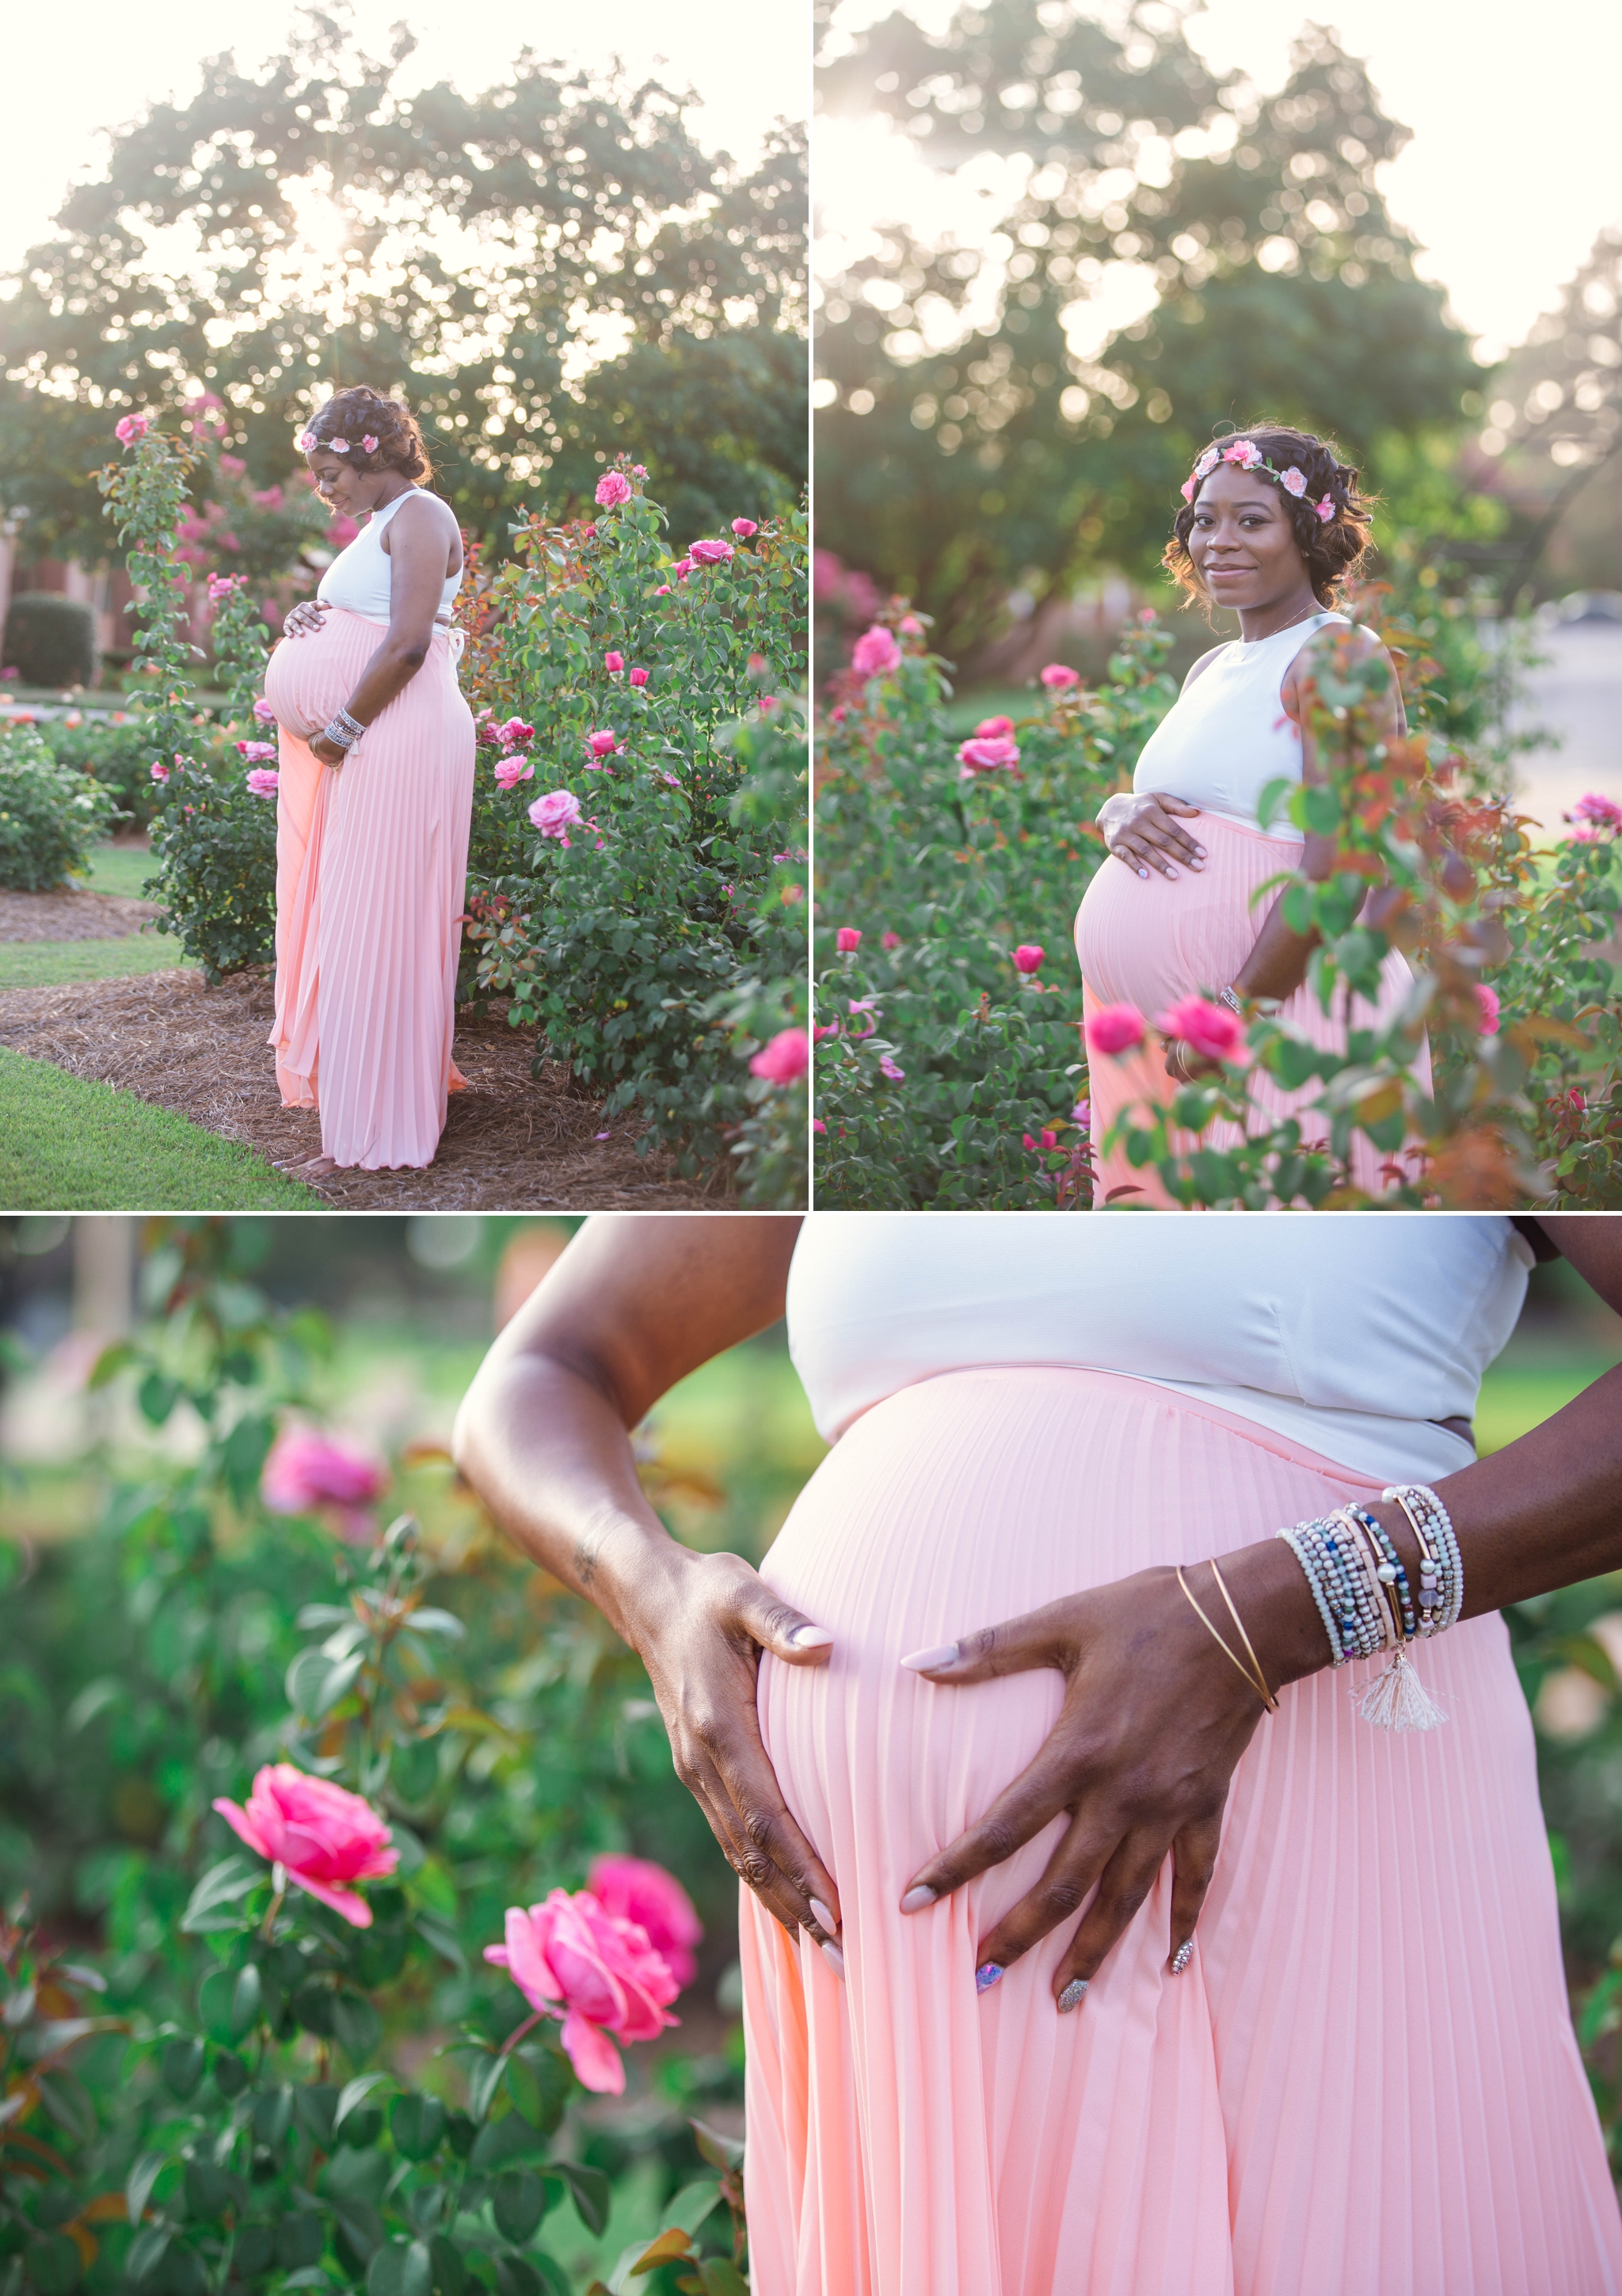 Maternity Photography Session at the FTCC Rose Garden in Fayetteville North Carolina